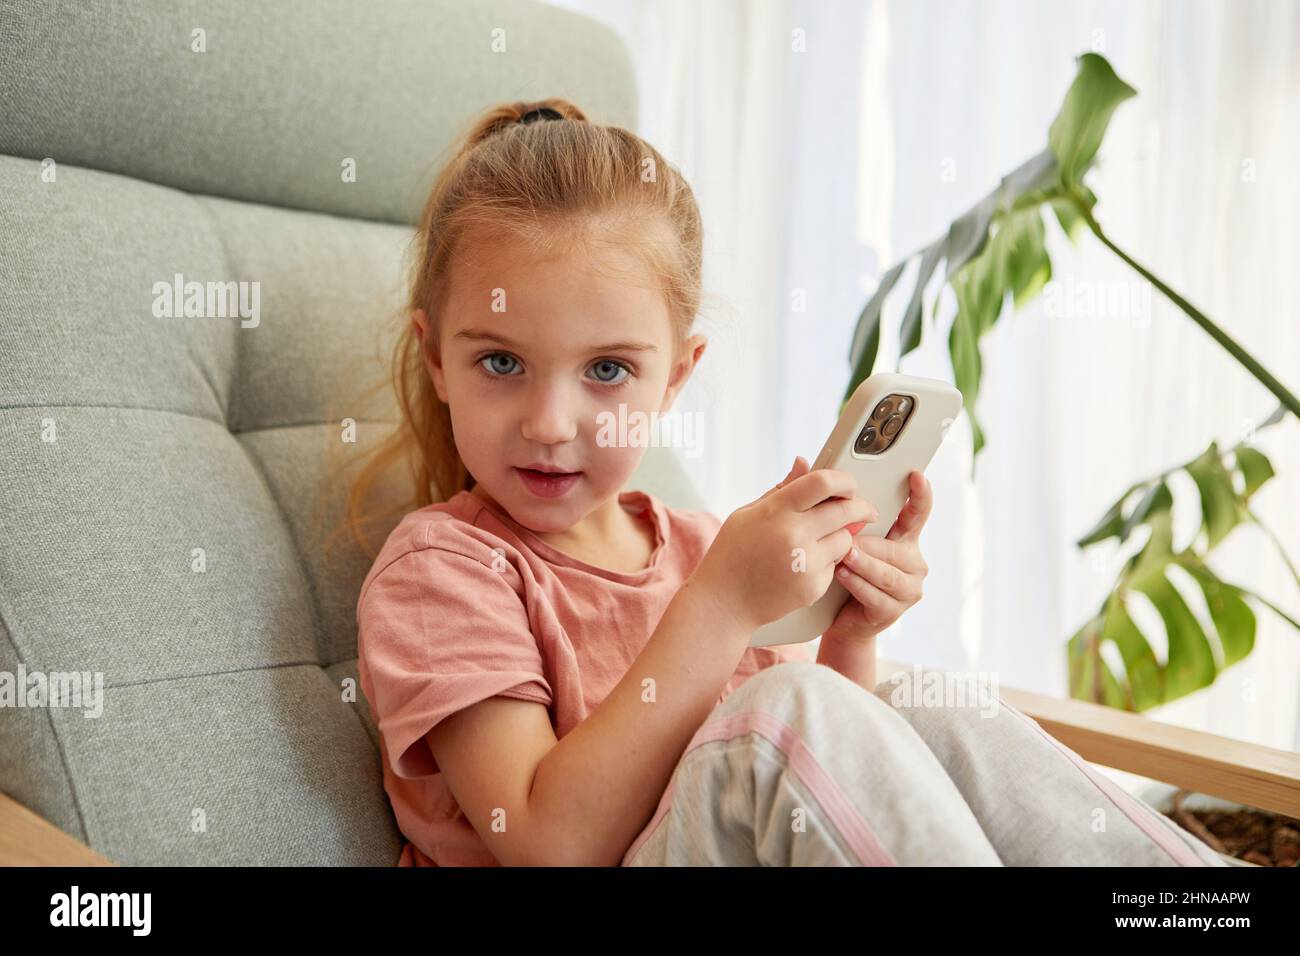 Portrait of reproachful little girl holding mobile phone and looking at camera sitting on chair at home Stock Photo